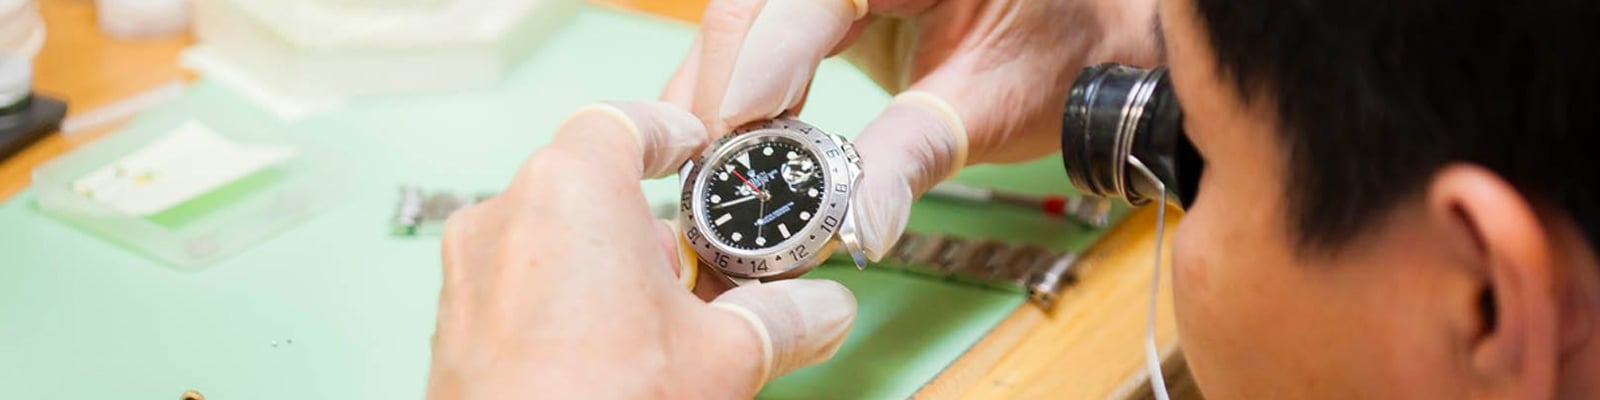 Bob's Watches and WatchCSA-Much More Than Just a Preowned Rolex